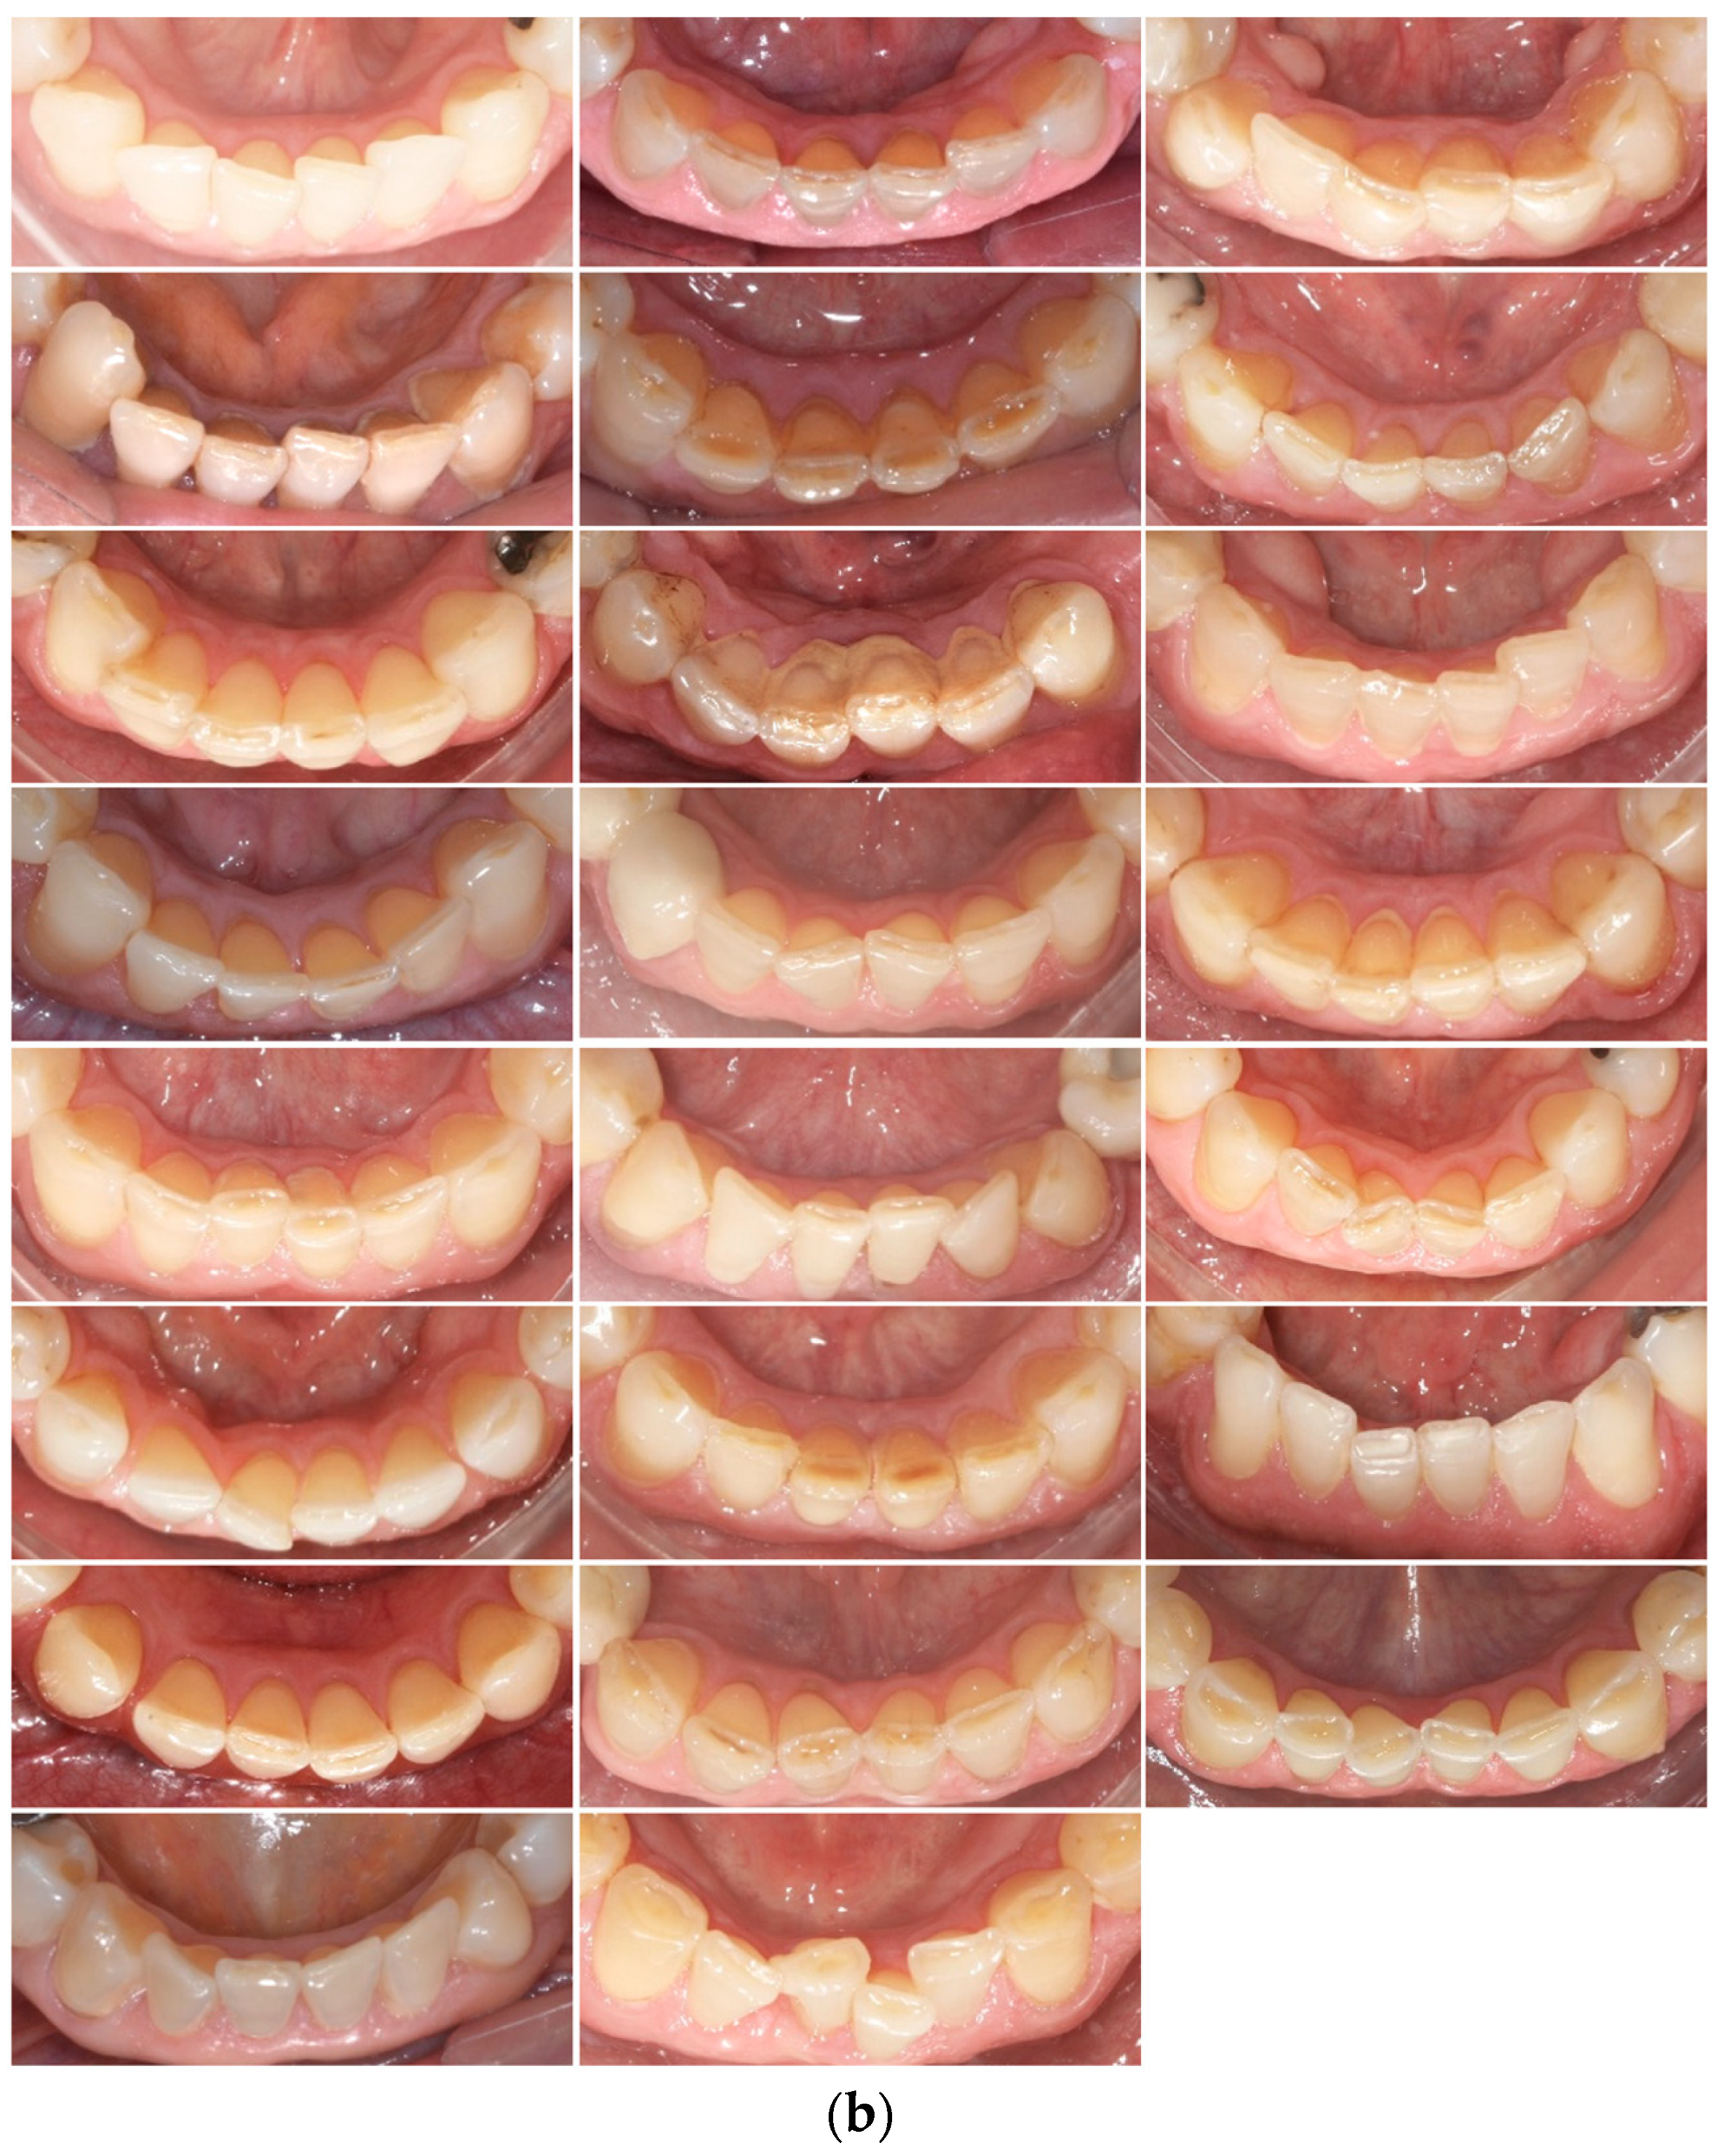 | Age Subjects of Pioneering JCM | Occlusion: Erosive Normal Free Tooth in Study the Longitudinal with Wear A to up 60 Full-Text